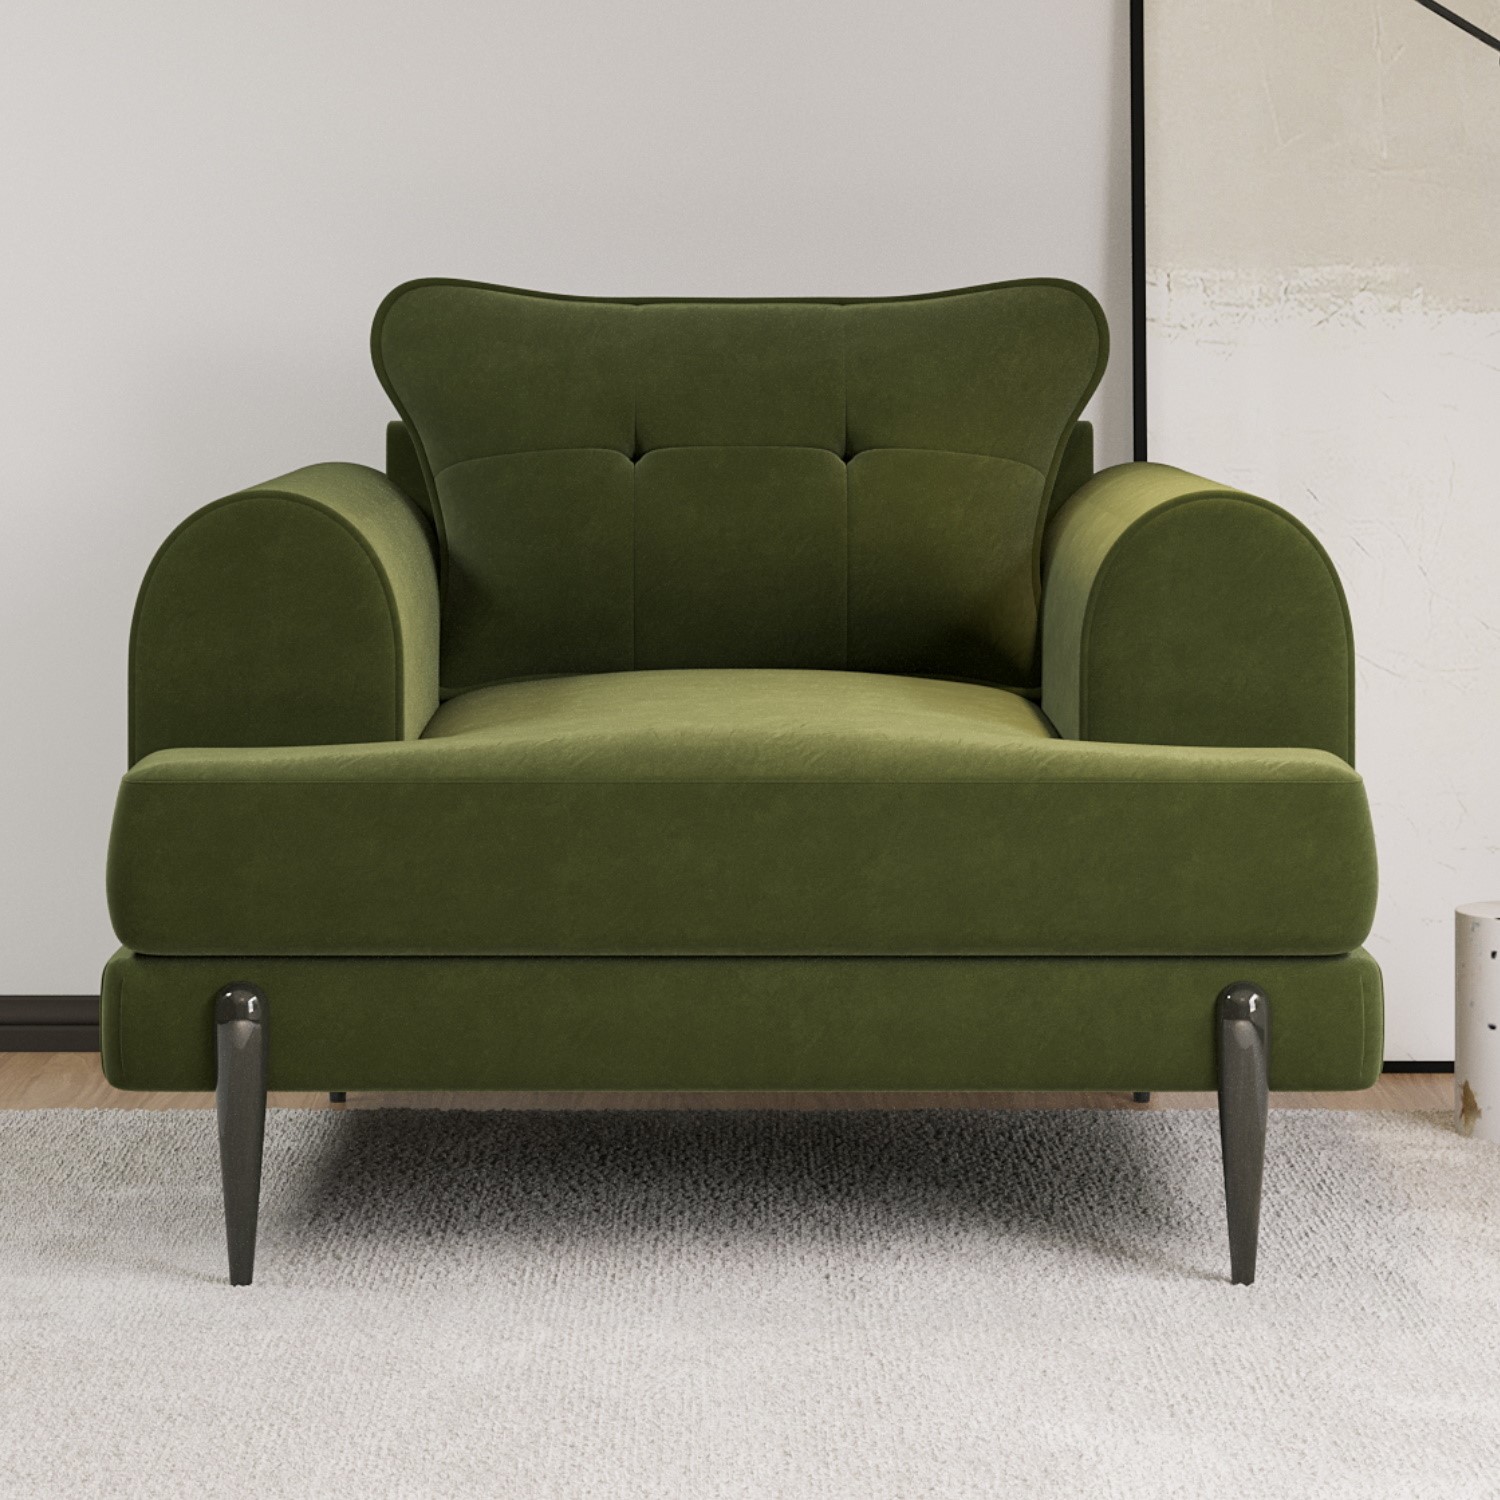 Read more about Olive green velvet armchair rosie